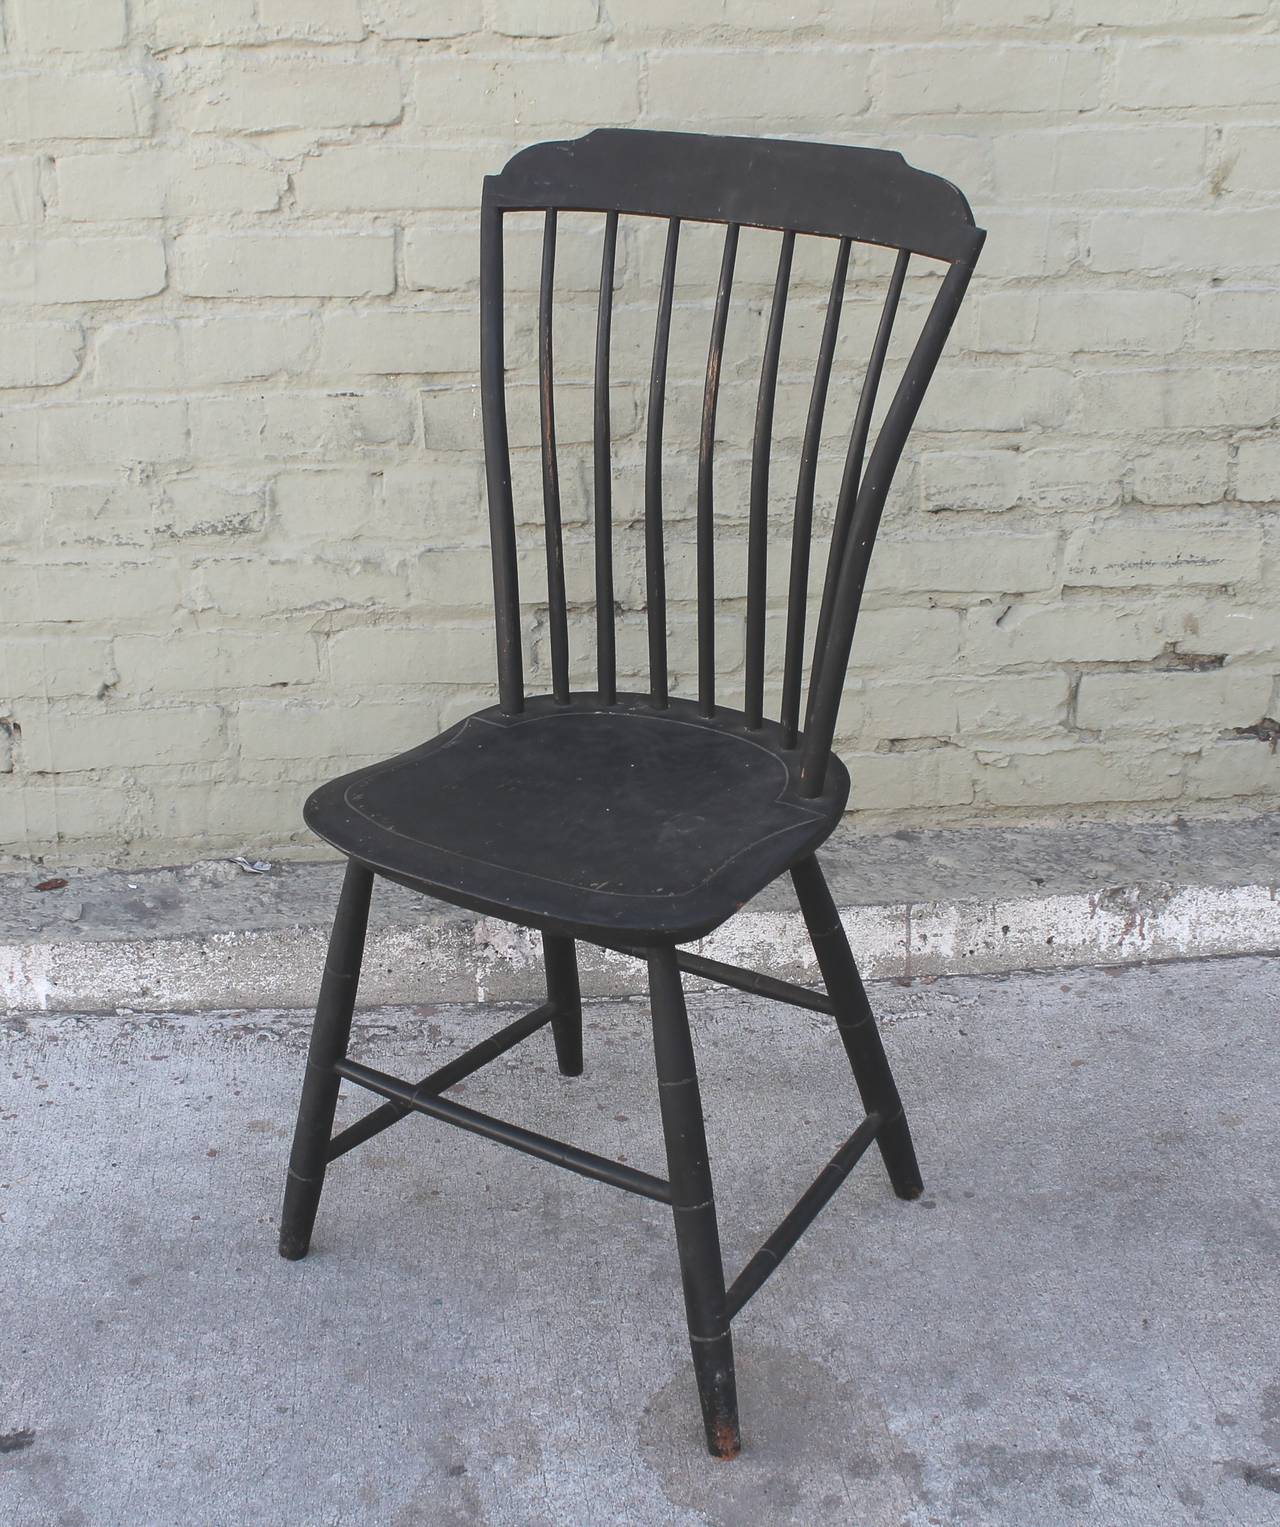 This is a amazing untouched black painted Windsor chair from New England is in untouched amazing surface with a date of 1812 on the reverse back splash. The condition is very good and sturdy. Dated by the maker and unsigned.